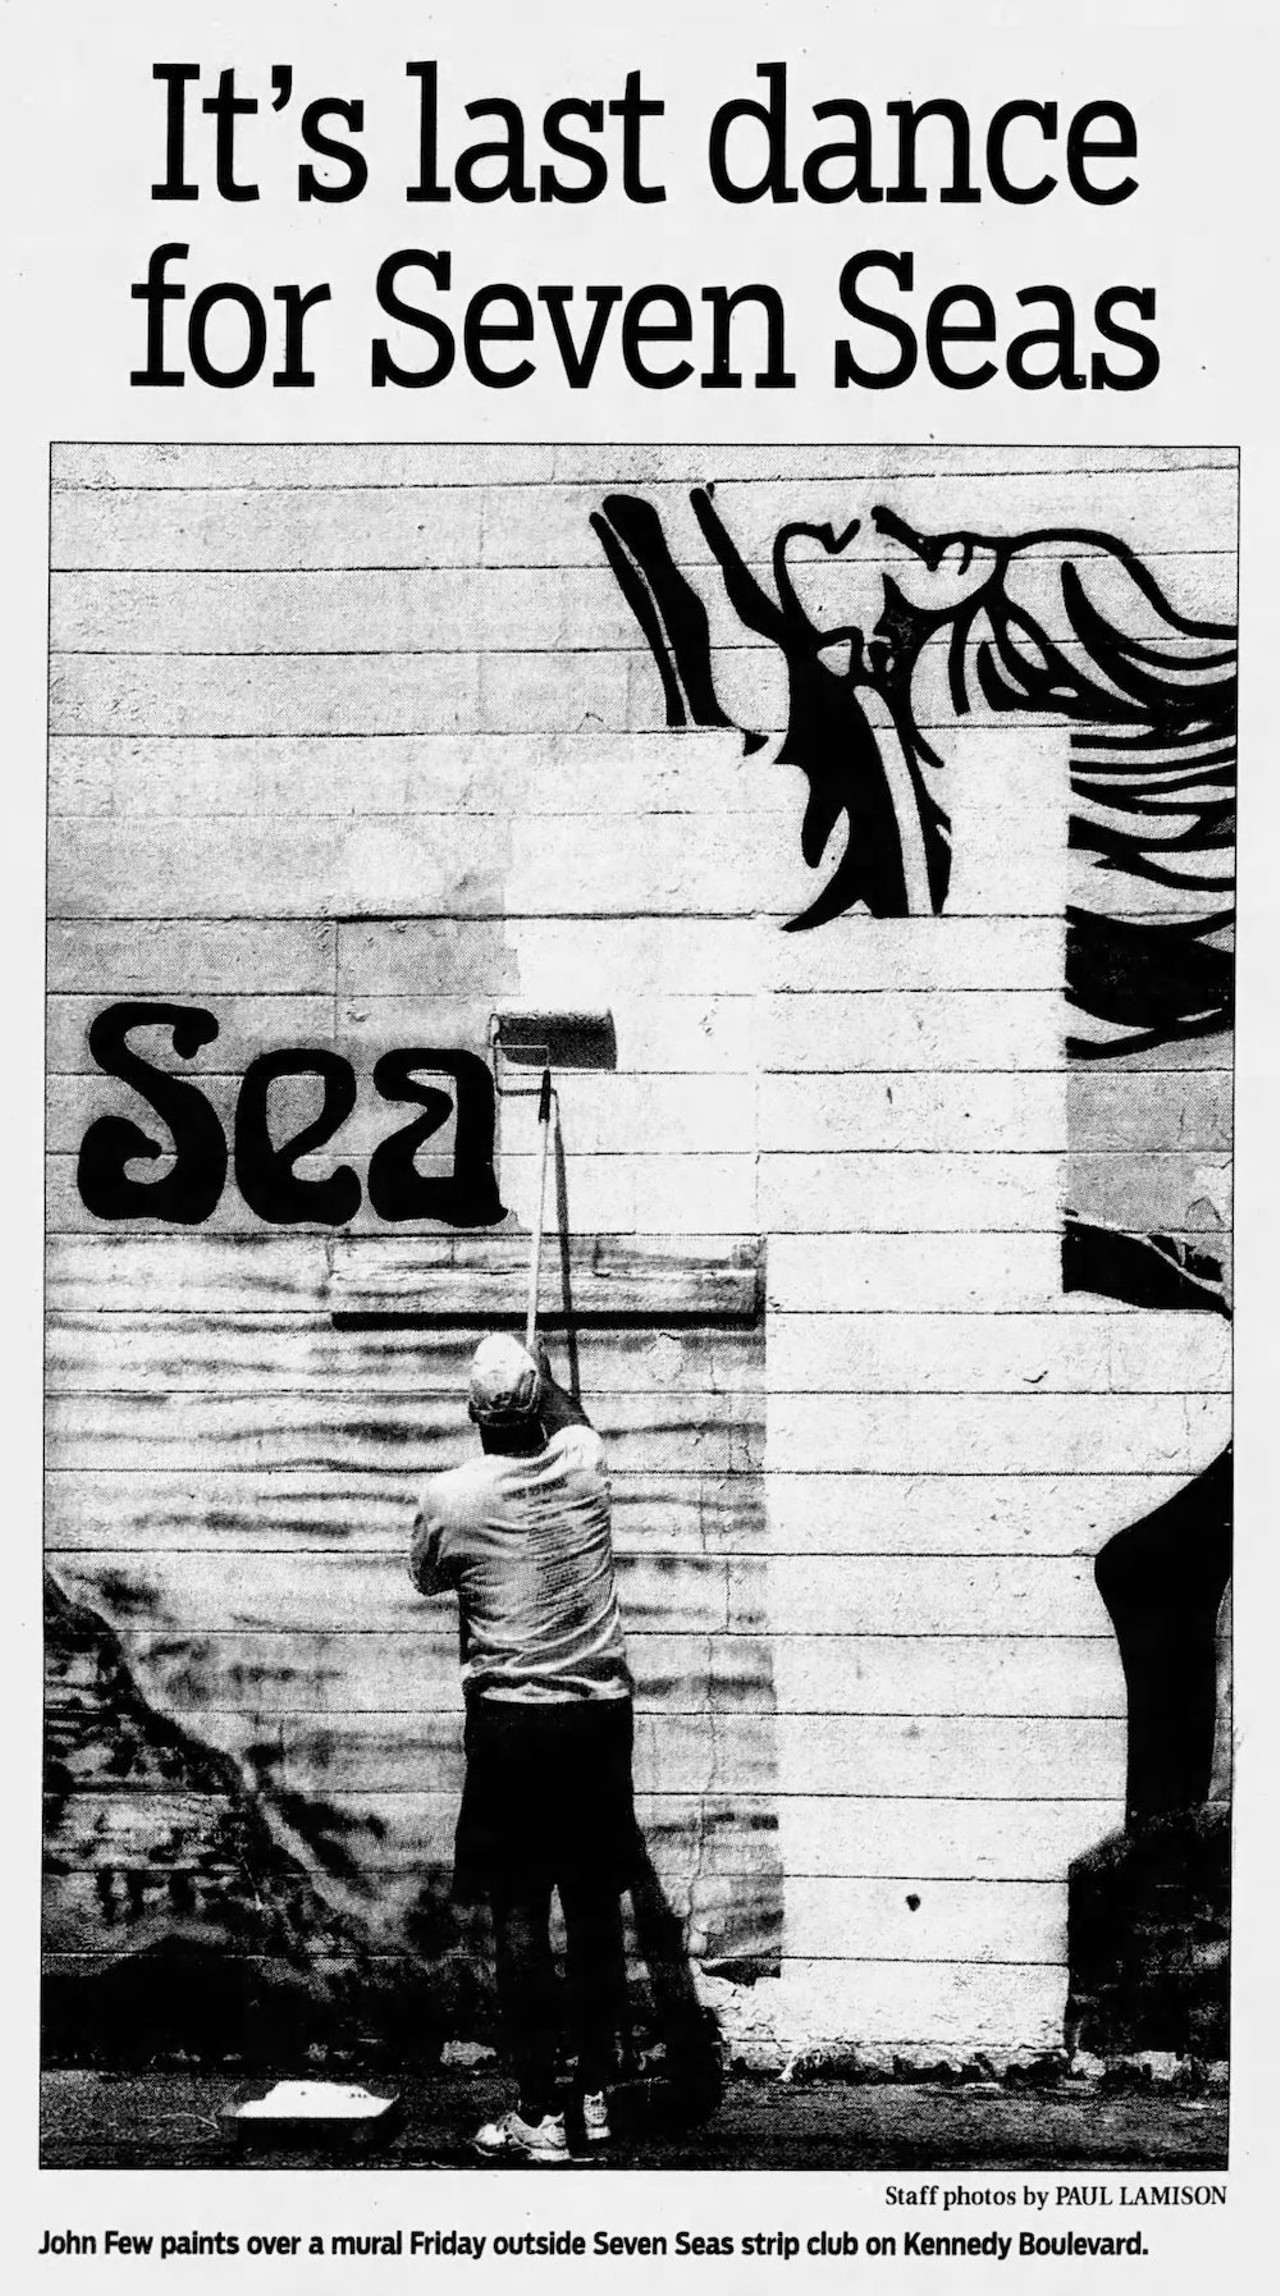 Seven Seas
Also known as “Seven Sleaze,” Seven Seas was a cheap strip club for those Tampeños down on their luck. Subject to police raids and ordinance defiance, the club closed in the late-2000s and the property on West Kennedy is now home to Acropolis Greek Taverna.
Photo via Tampa Tribune May 2010/Newspapers.com